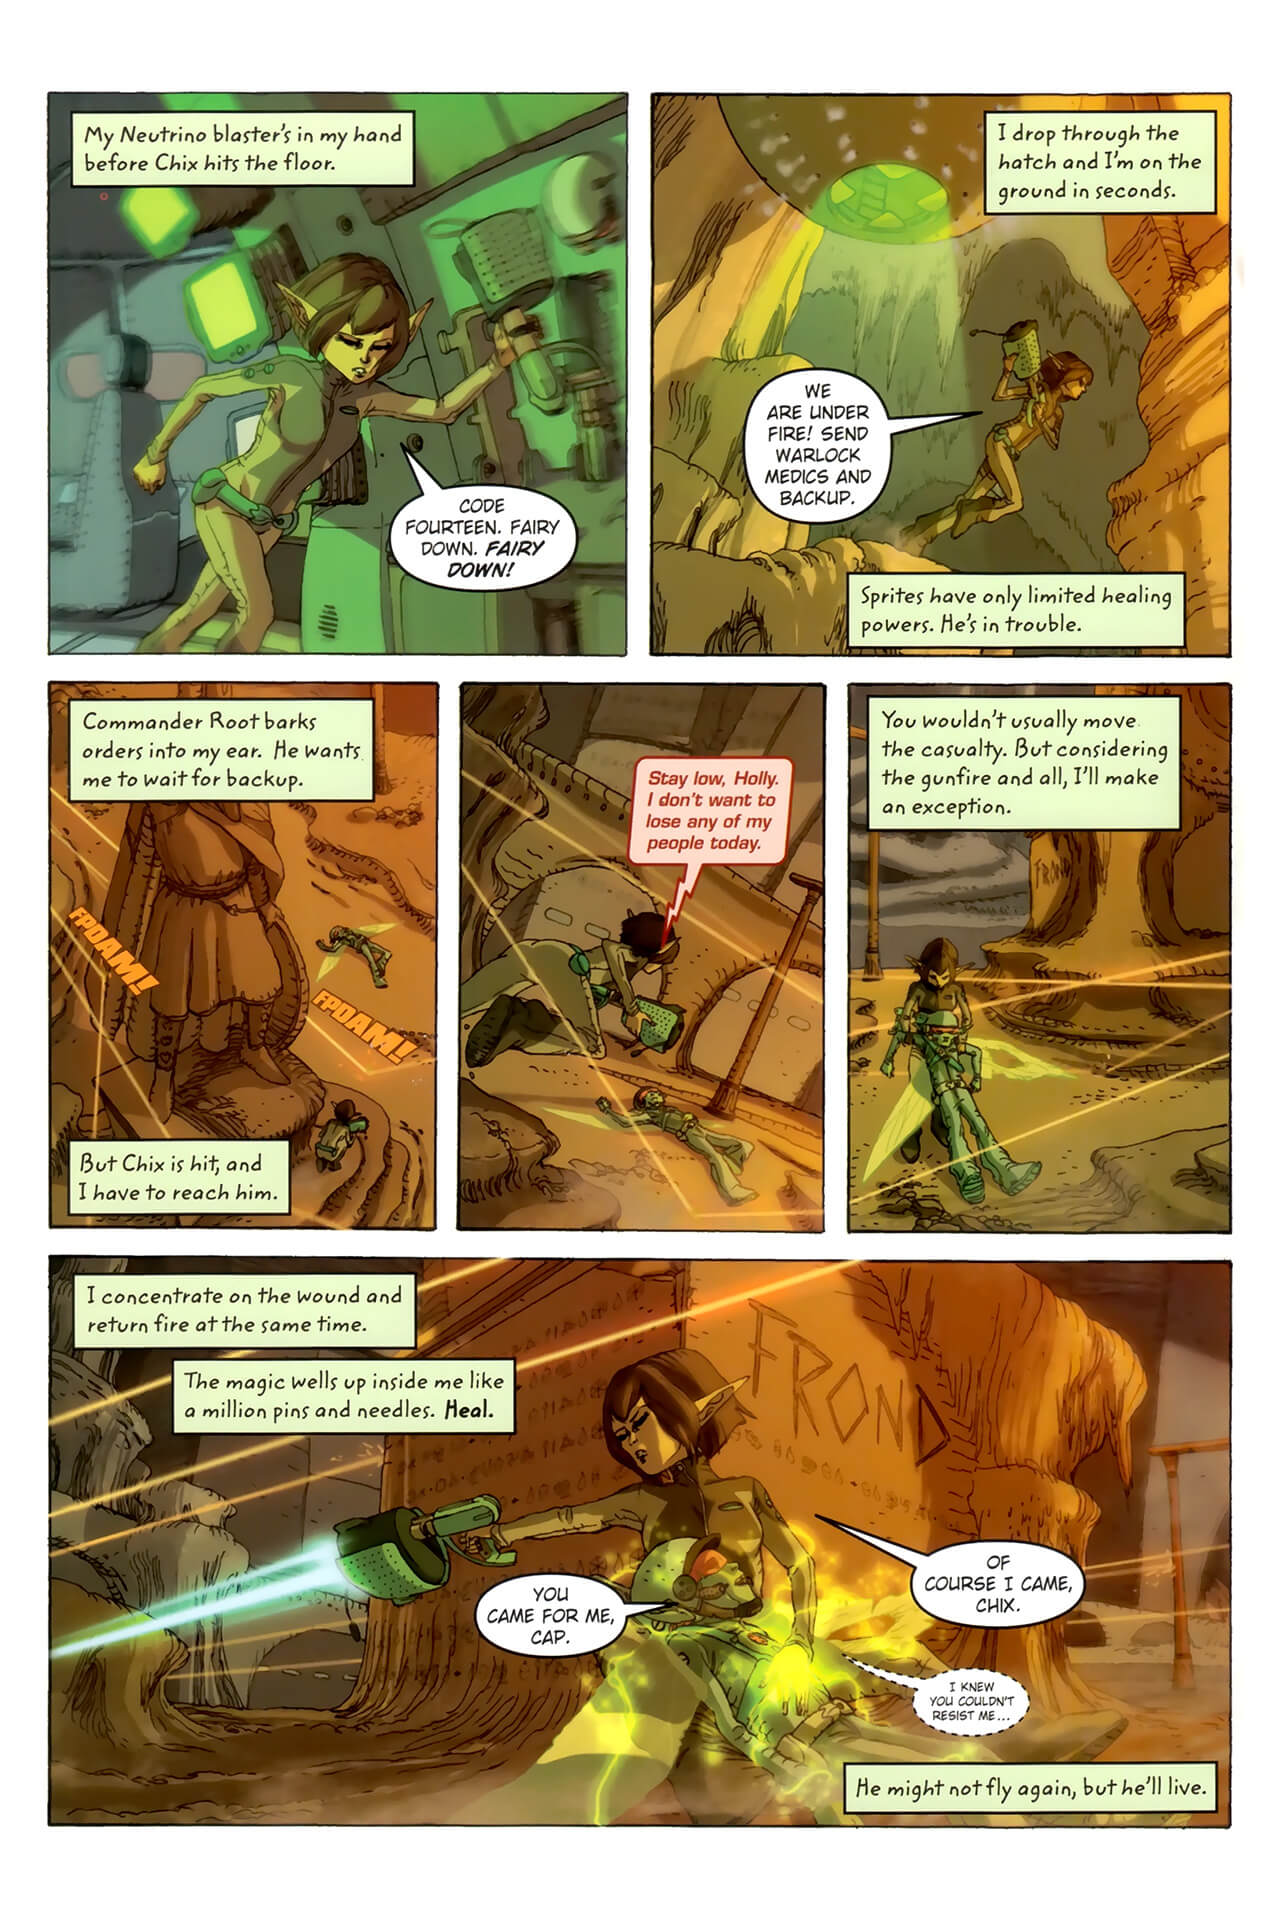 page 16 of artemis fowl the arctic incident graphic novel